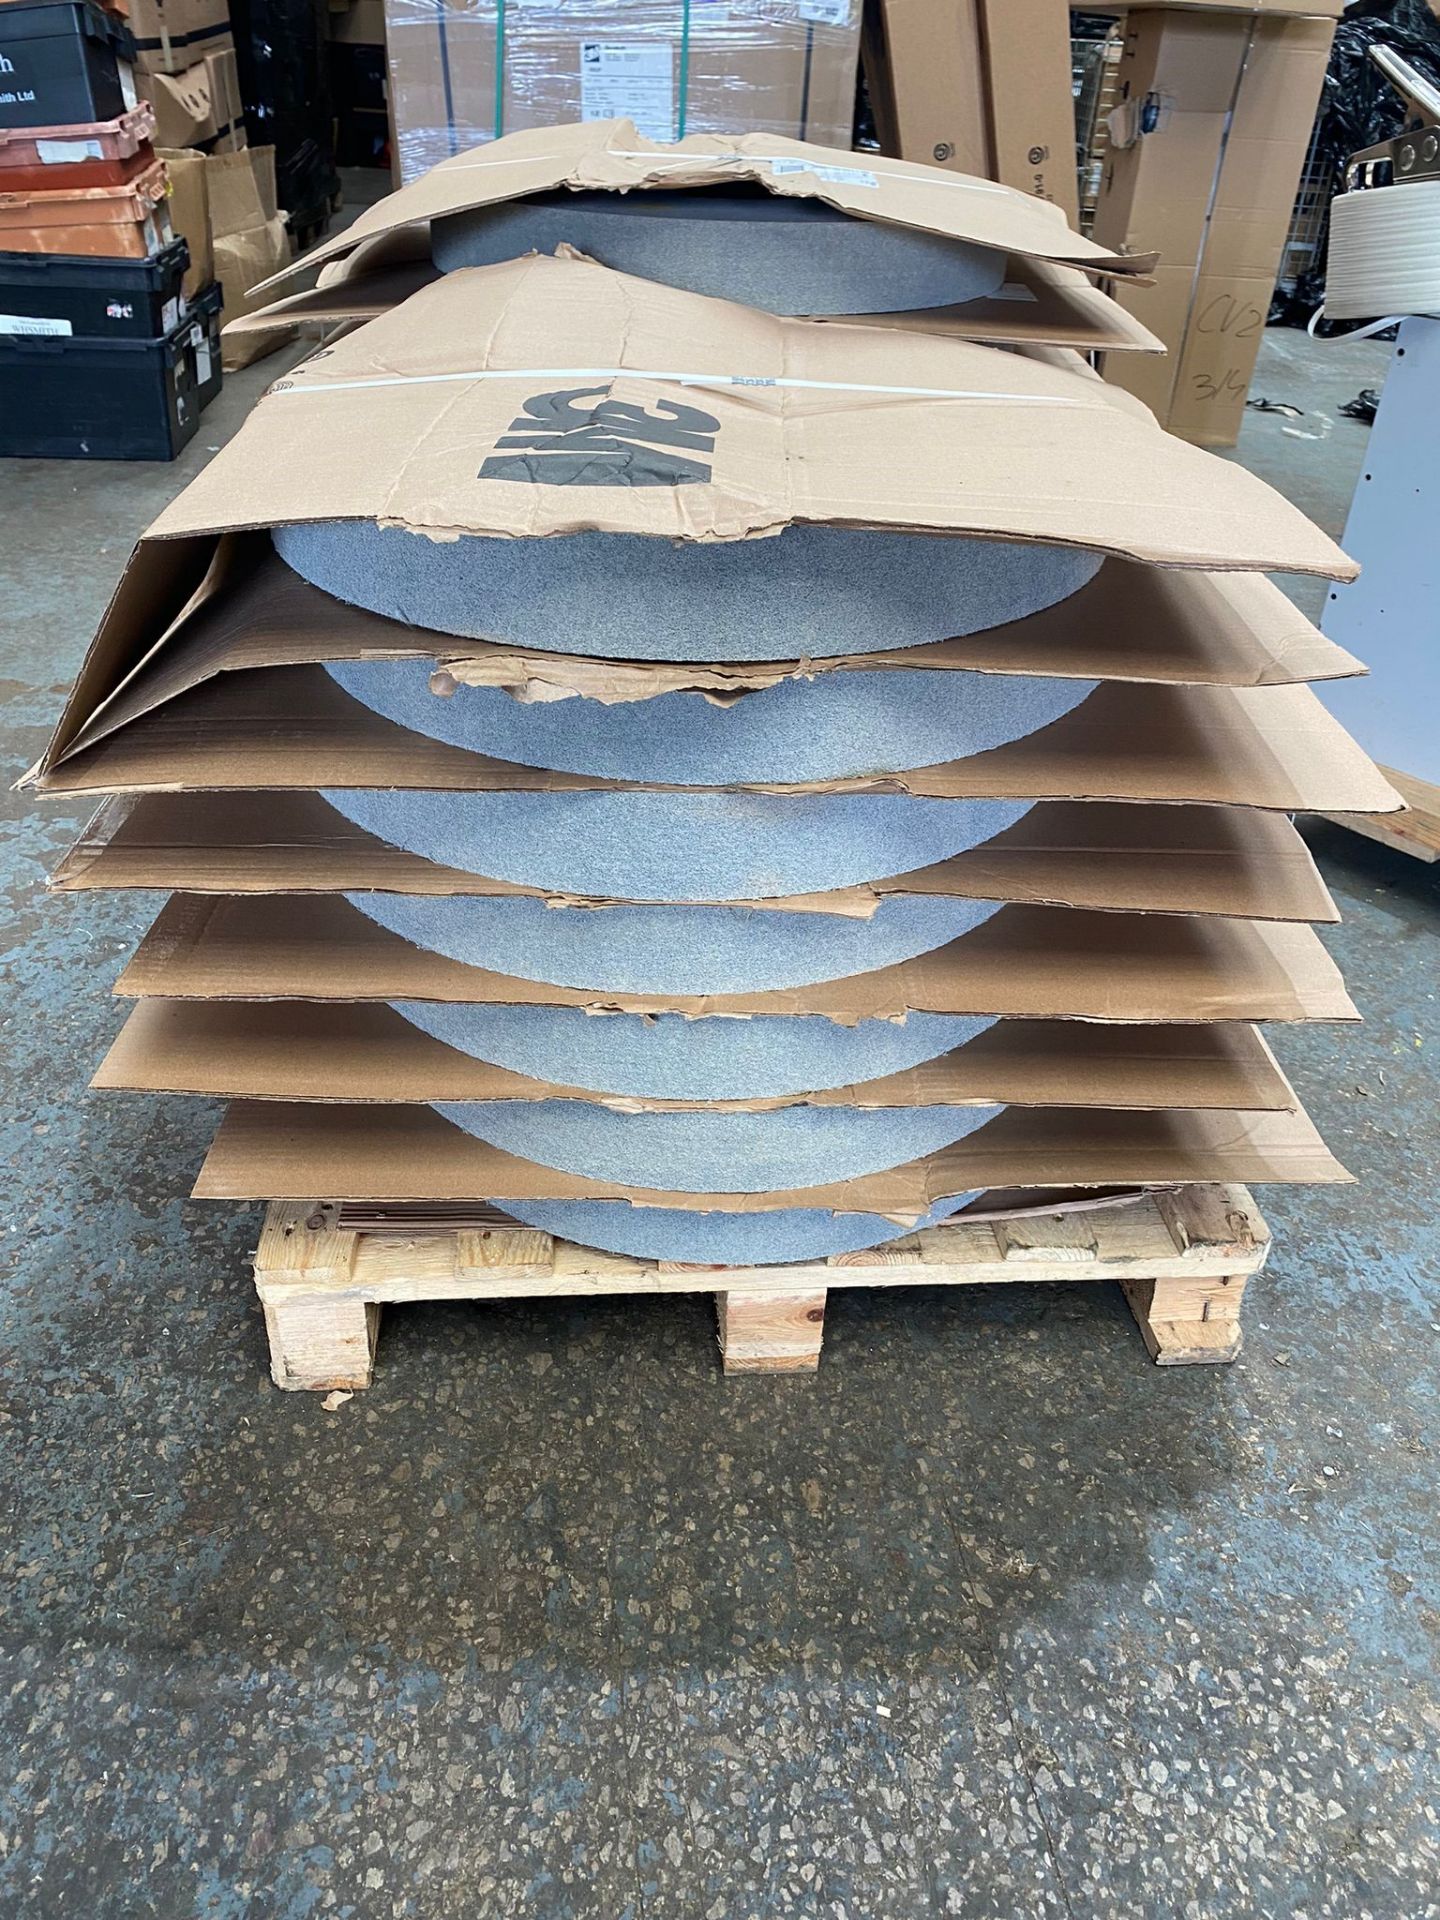 PALLET OF LARGE 3M SCOTCH-BRITE ABRASIVE DEBURRING WHEELS INDUSTRIAL TOOLS - Image 3 of 5